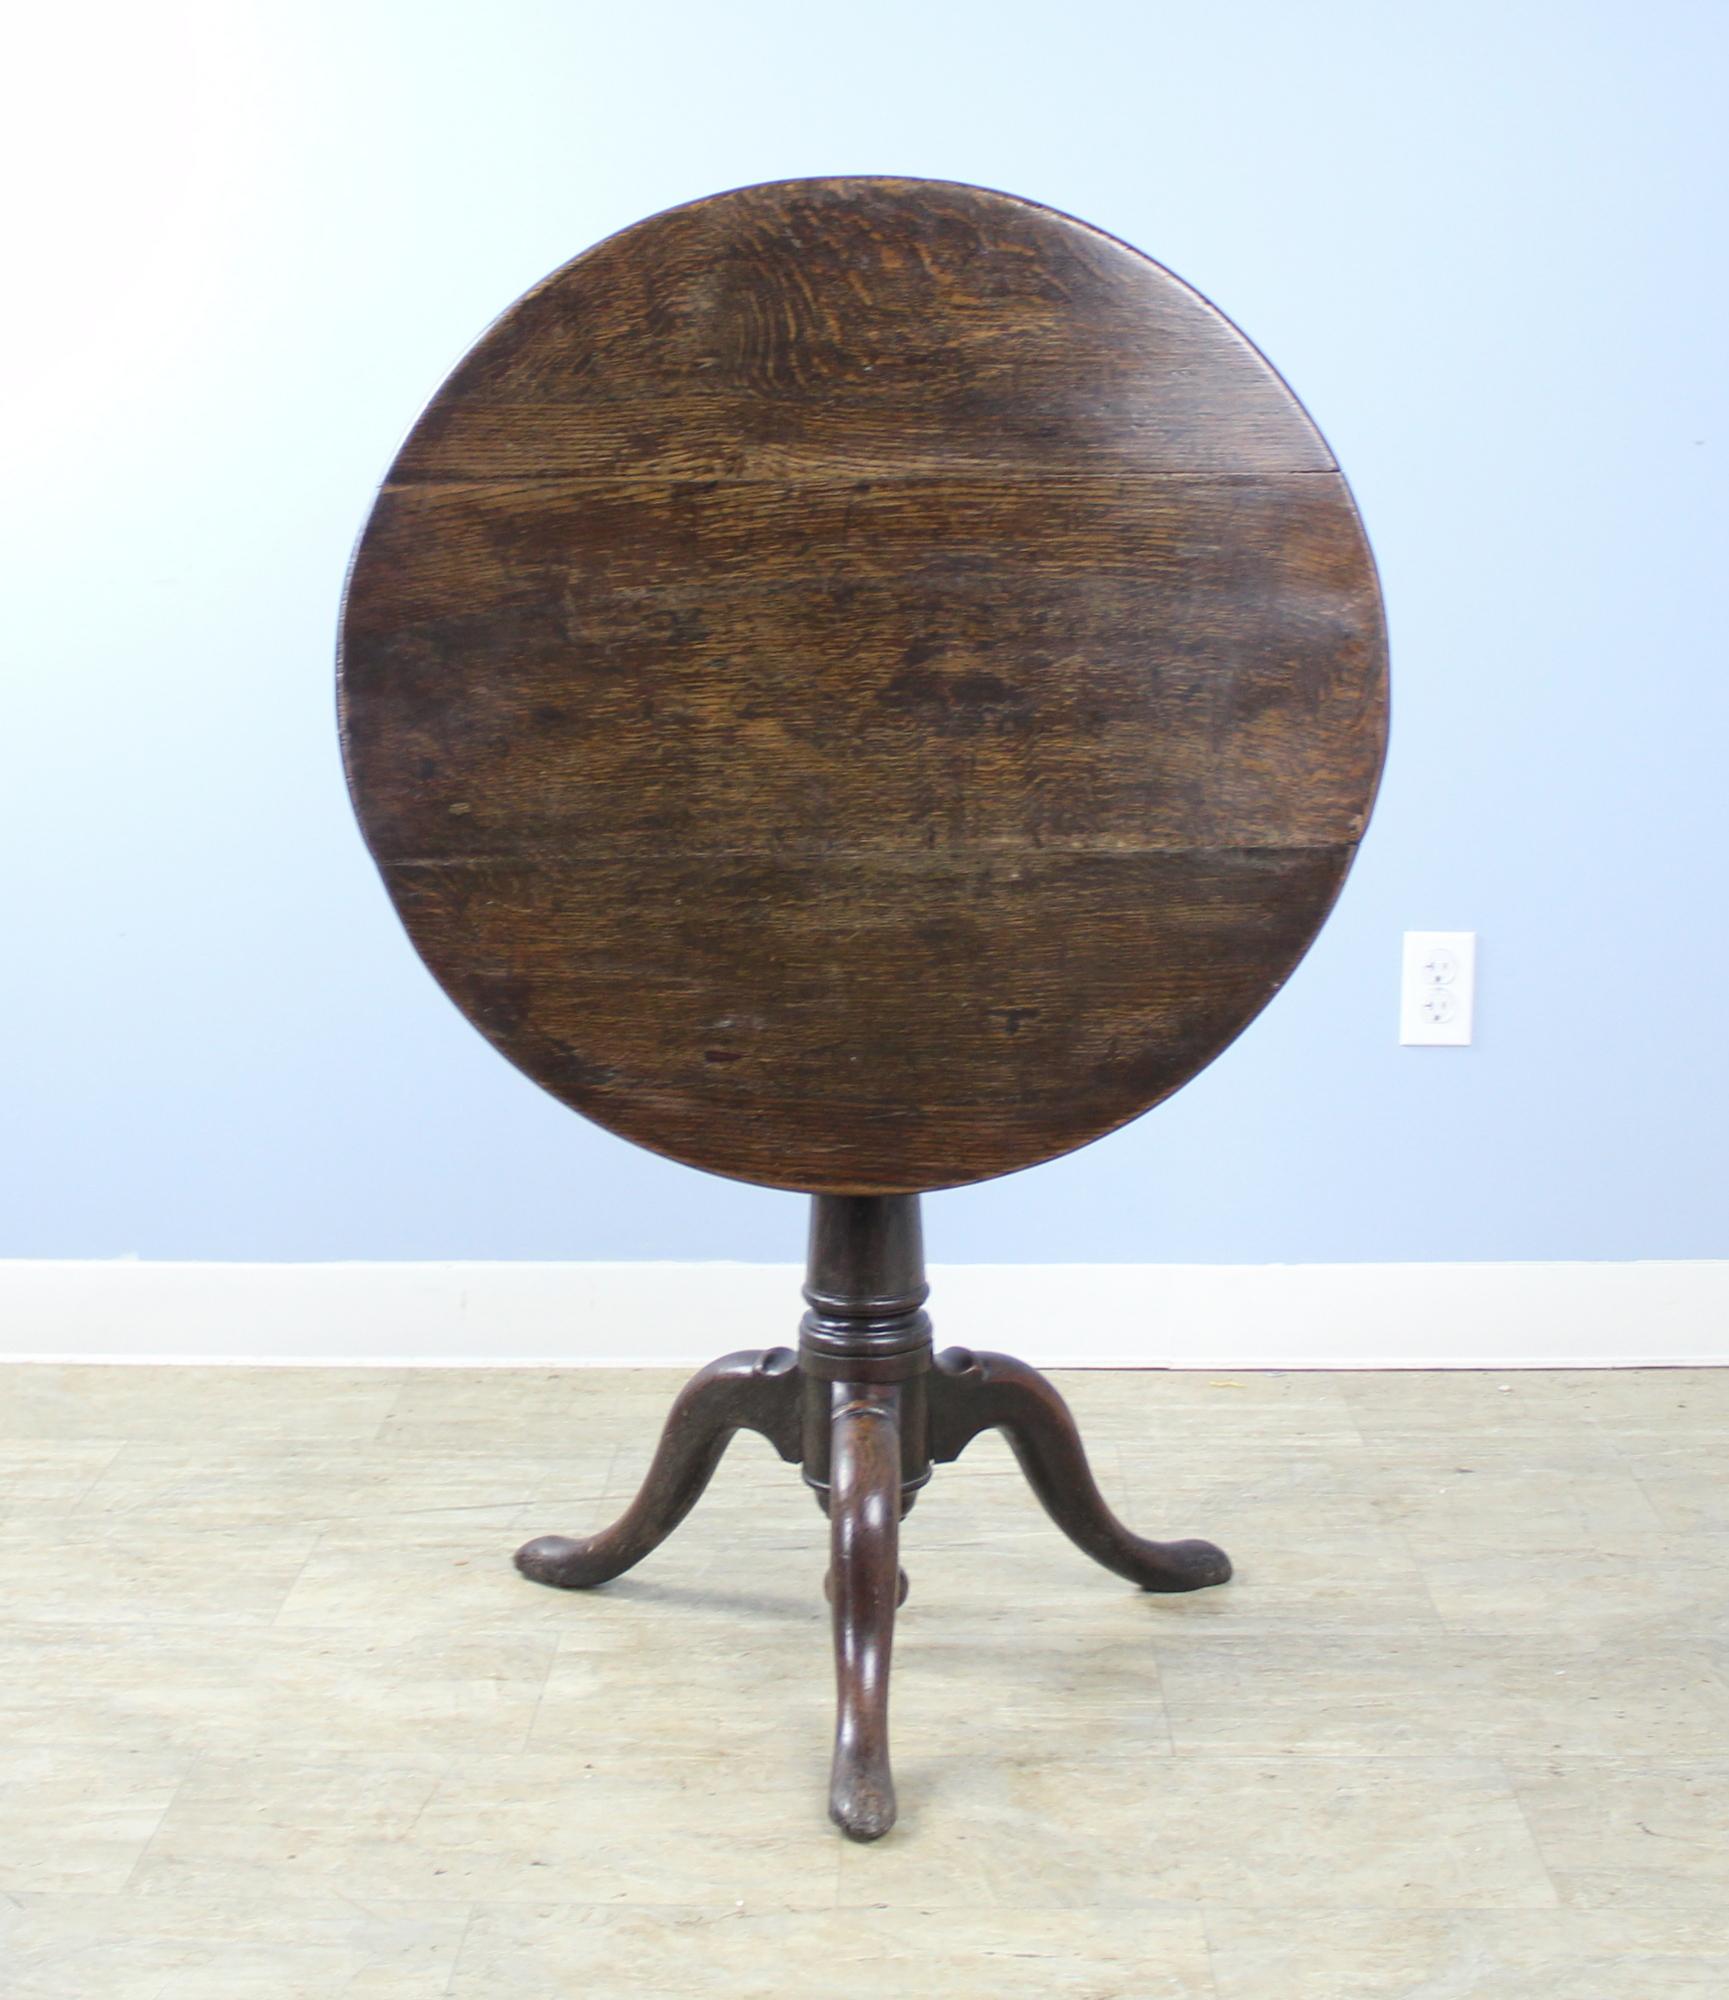 Here is a Classic very early period oak Georgian tilt-top pedestal table, in lovely rich oak. Simple birdcage mechanism and very shapely. Excellent for a side table or end table, also it is a very good height for a lamp table. Color, grain and